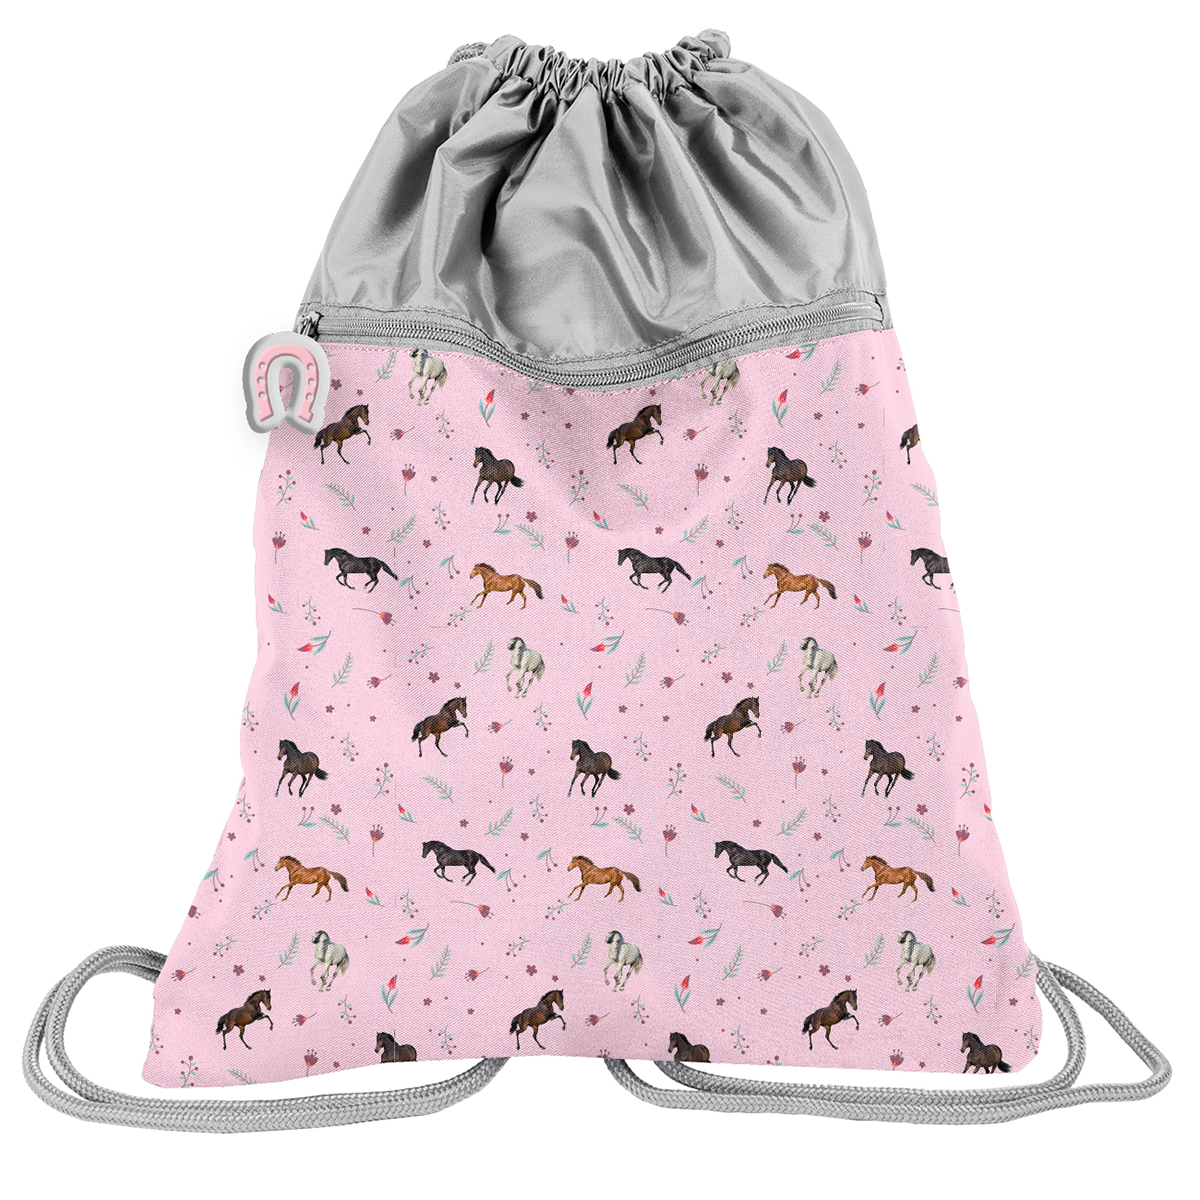 Animal Pictures Gymbag Horses - 45 x 34 cm - Polyester